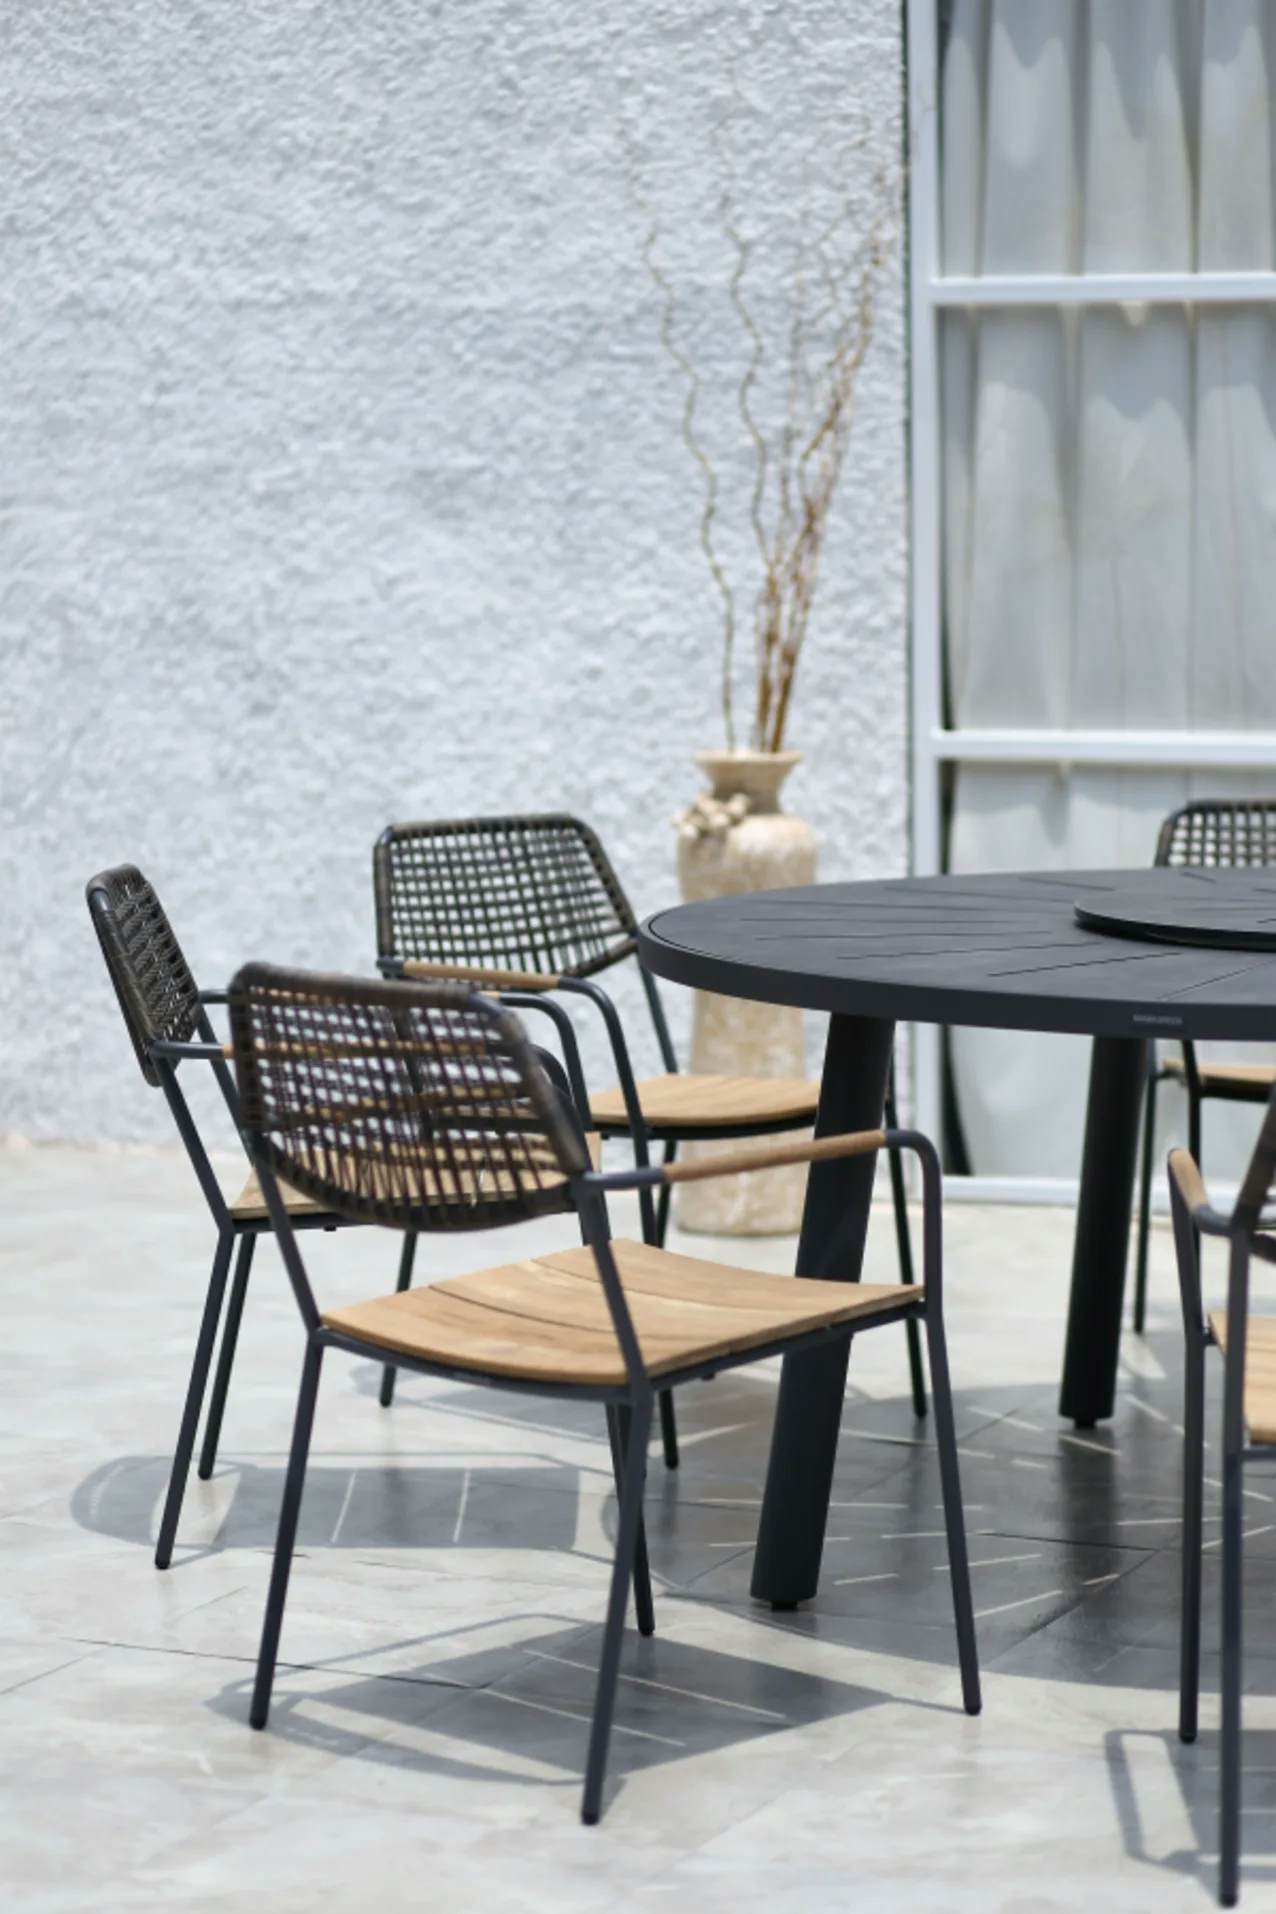 Meika Stacking Chair and HPL Round Table